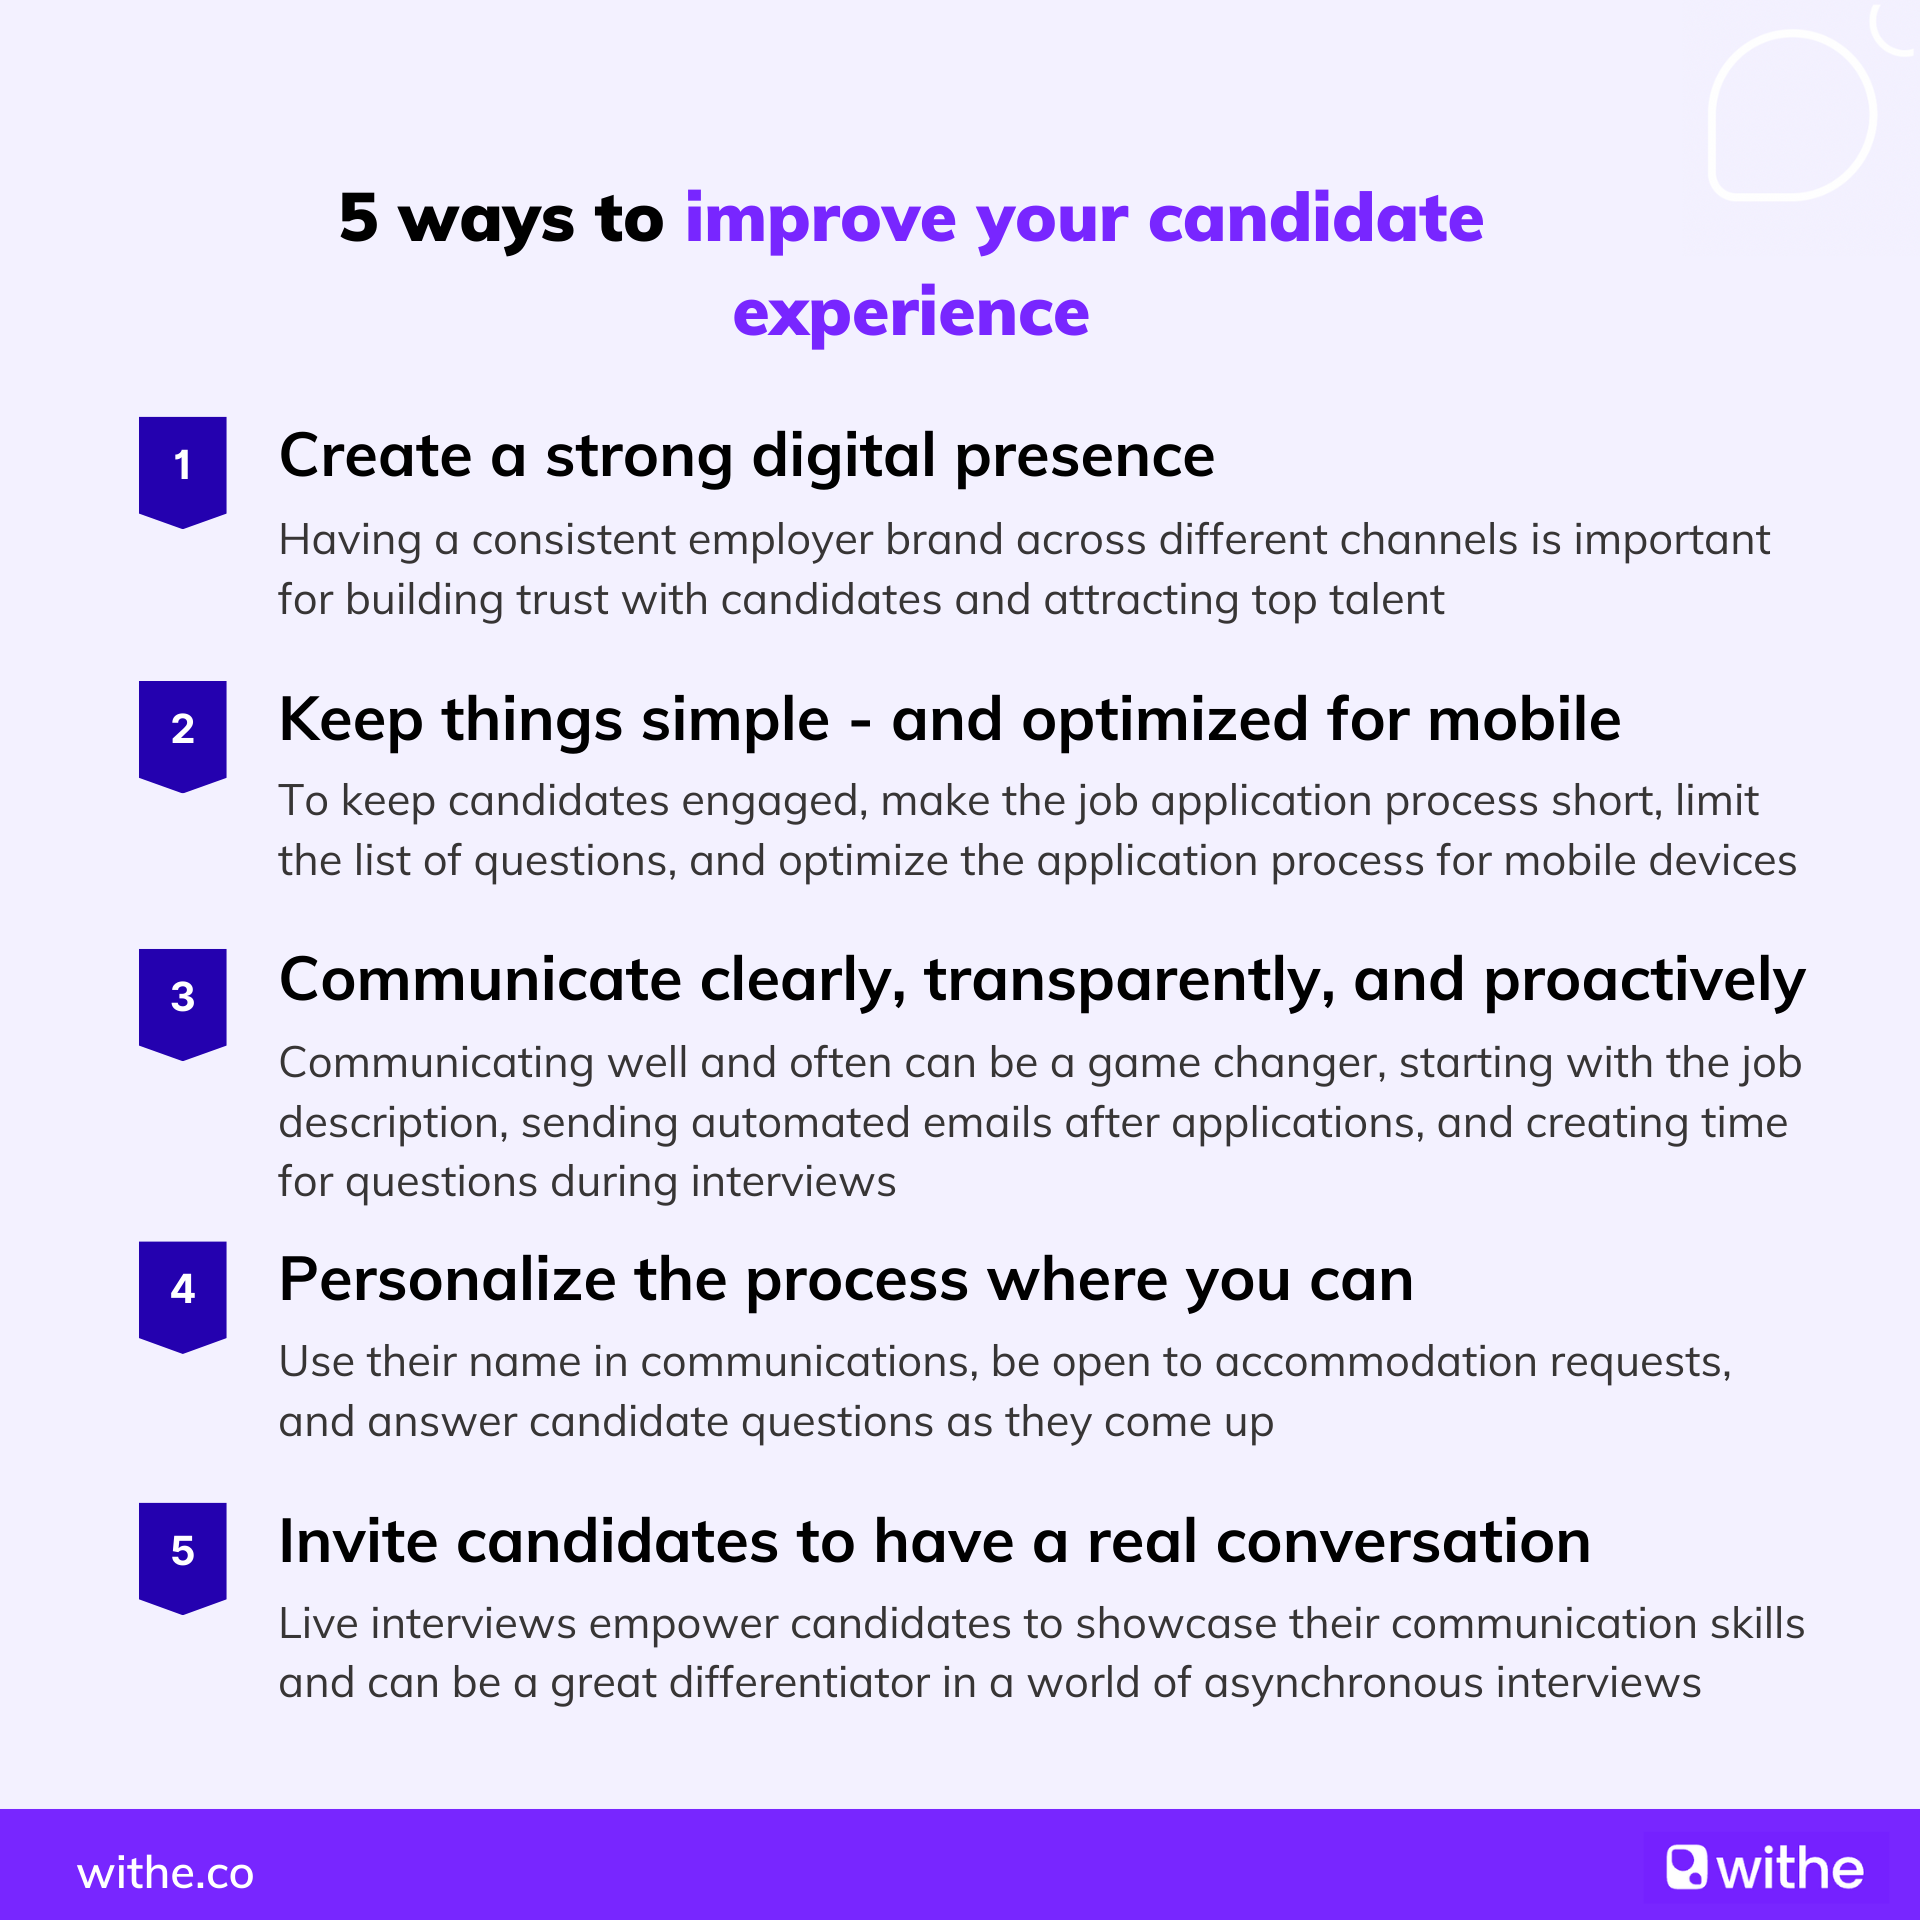 5 ways to improve your candidate experience